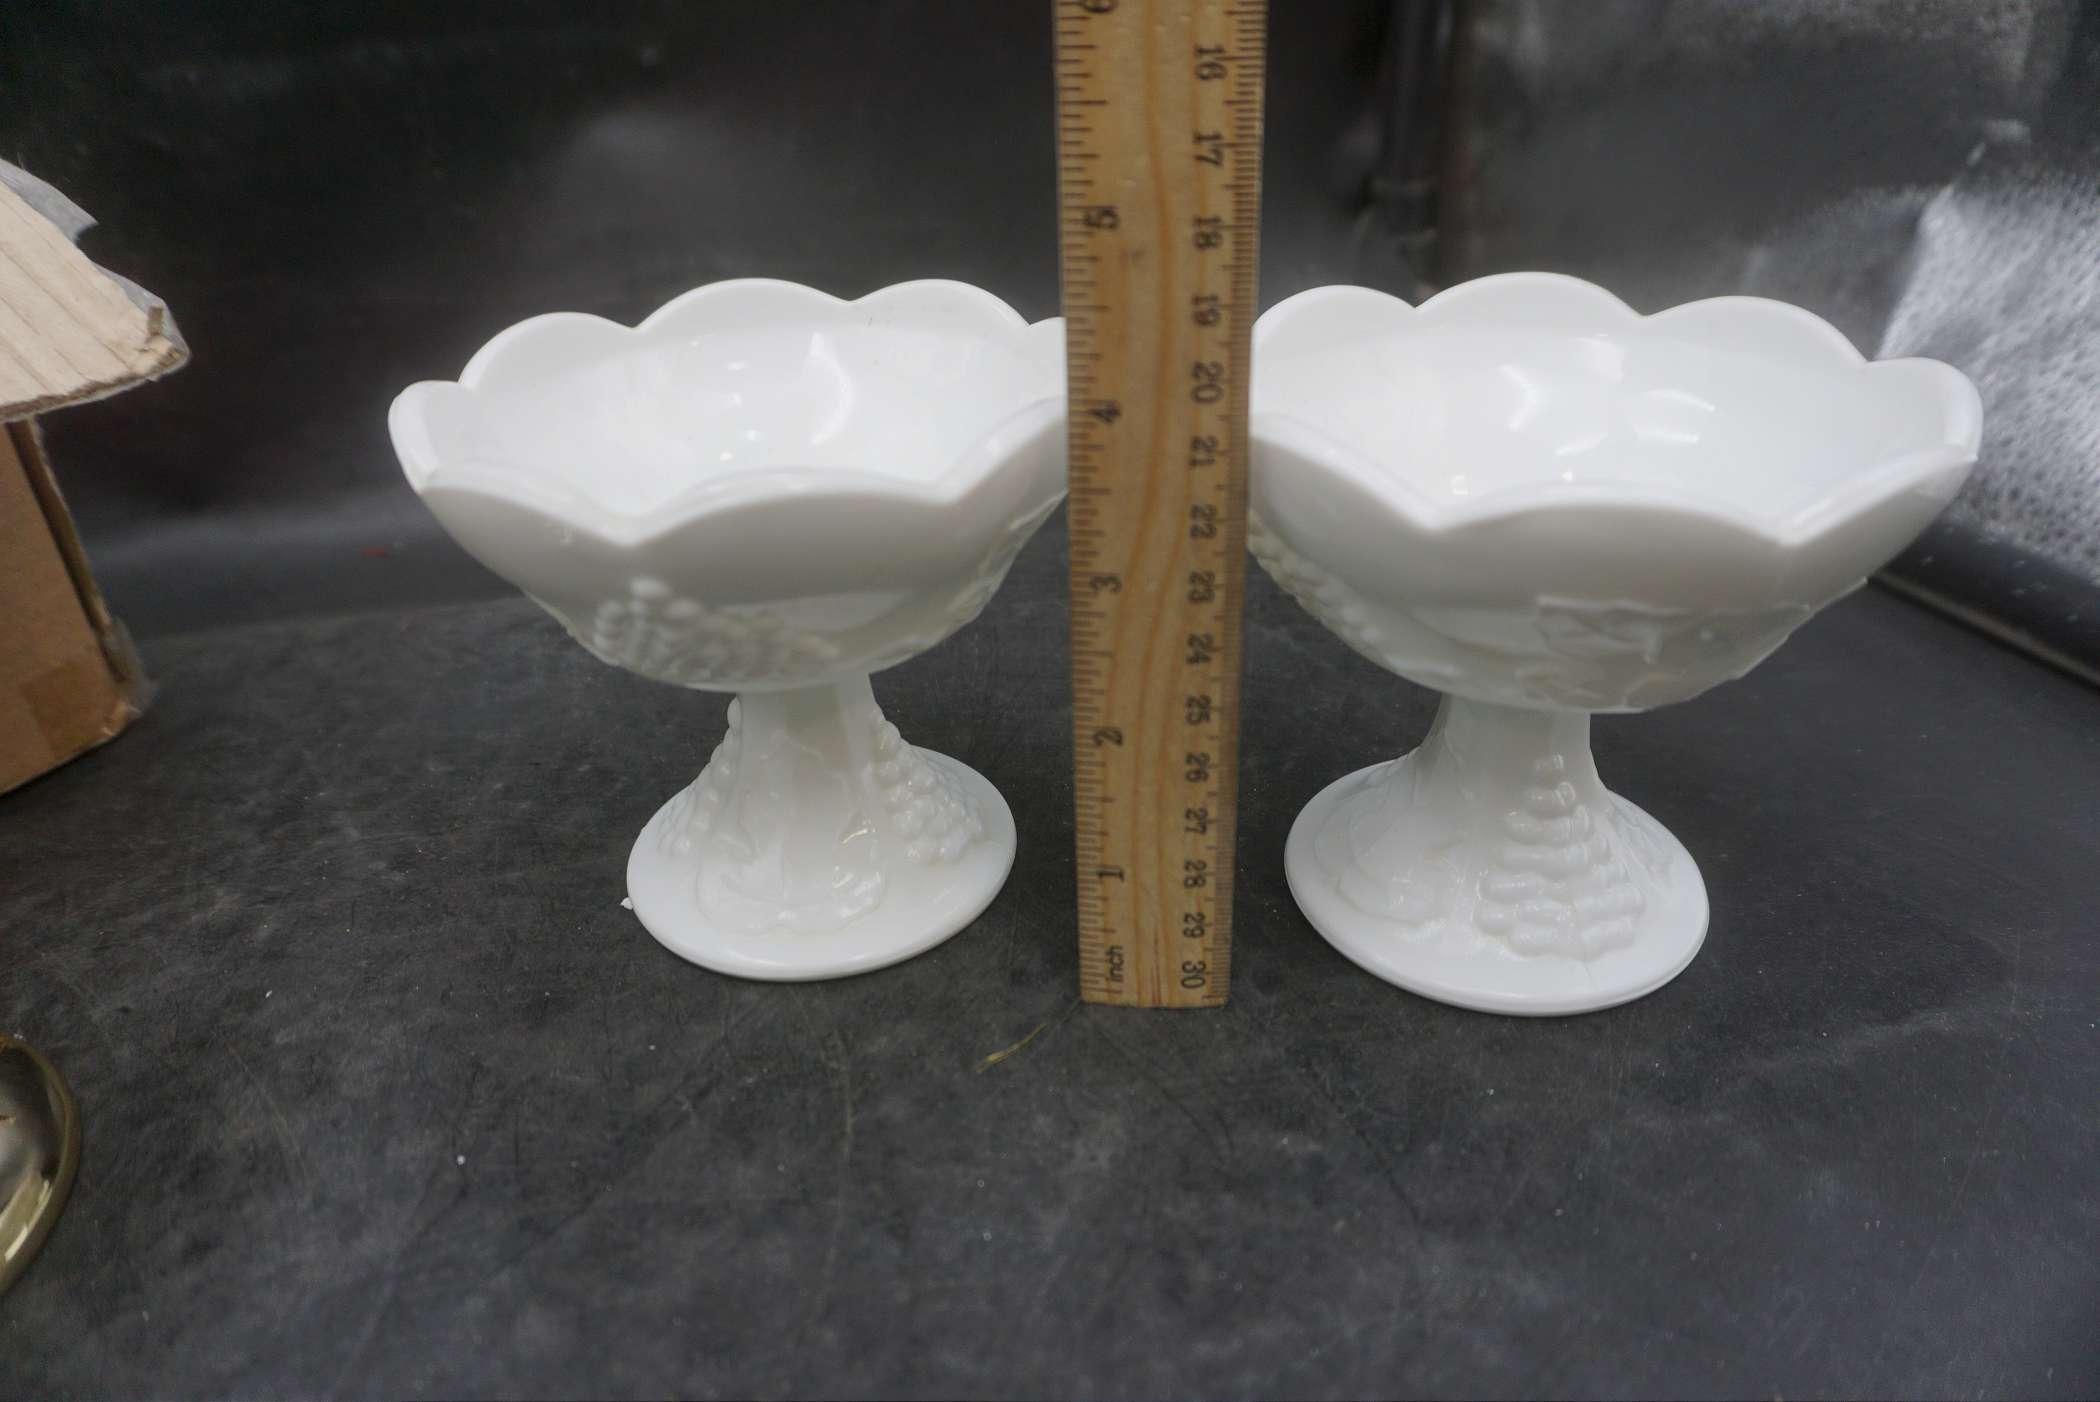 Milk Glass Dishes, Brass Colored Candlestick Holders